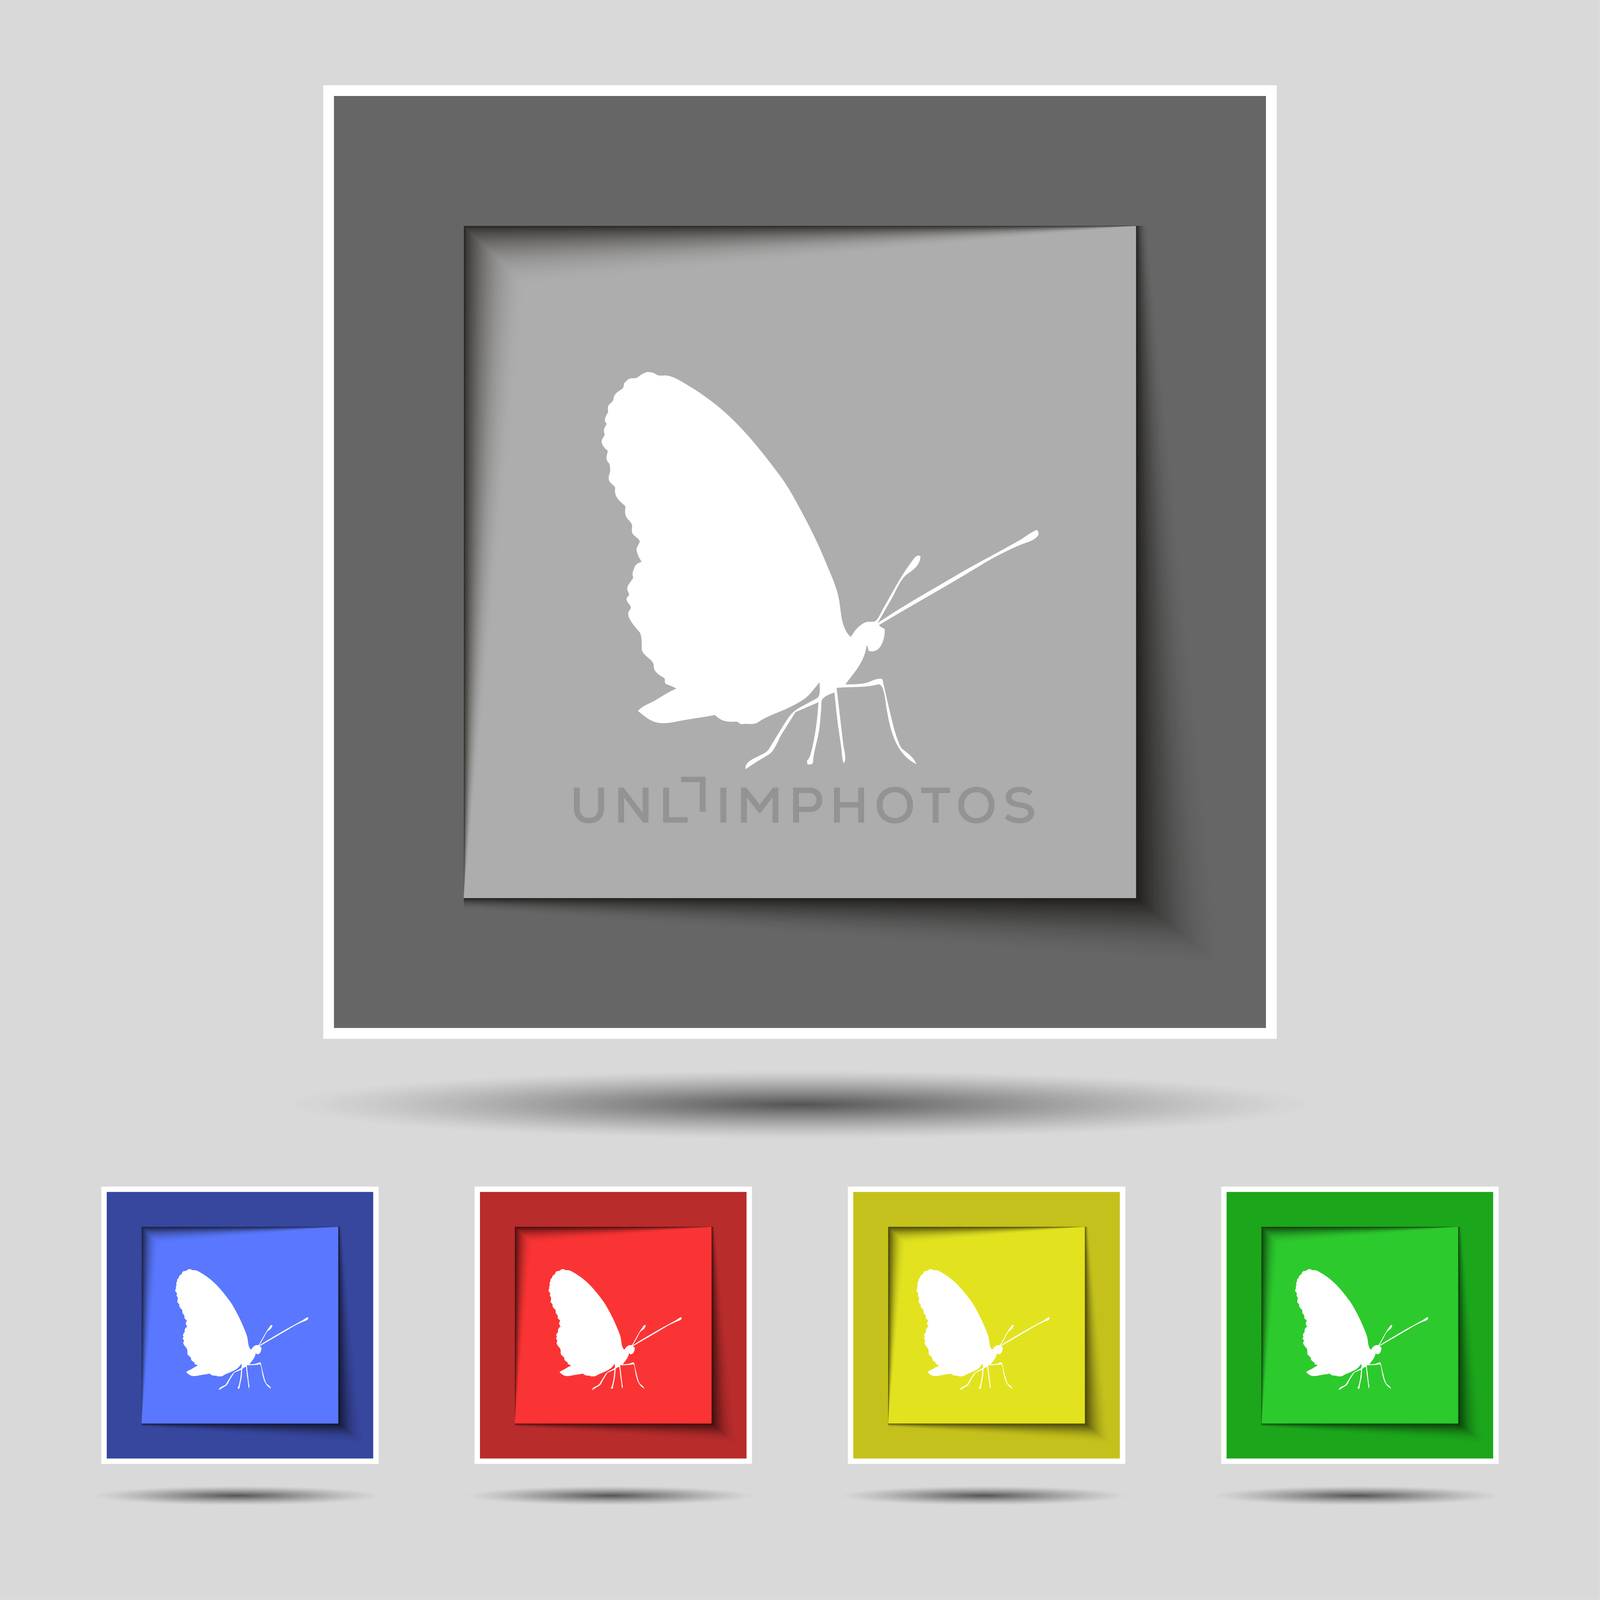 butterfly icon sign on original five colored buttons. illustration